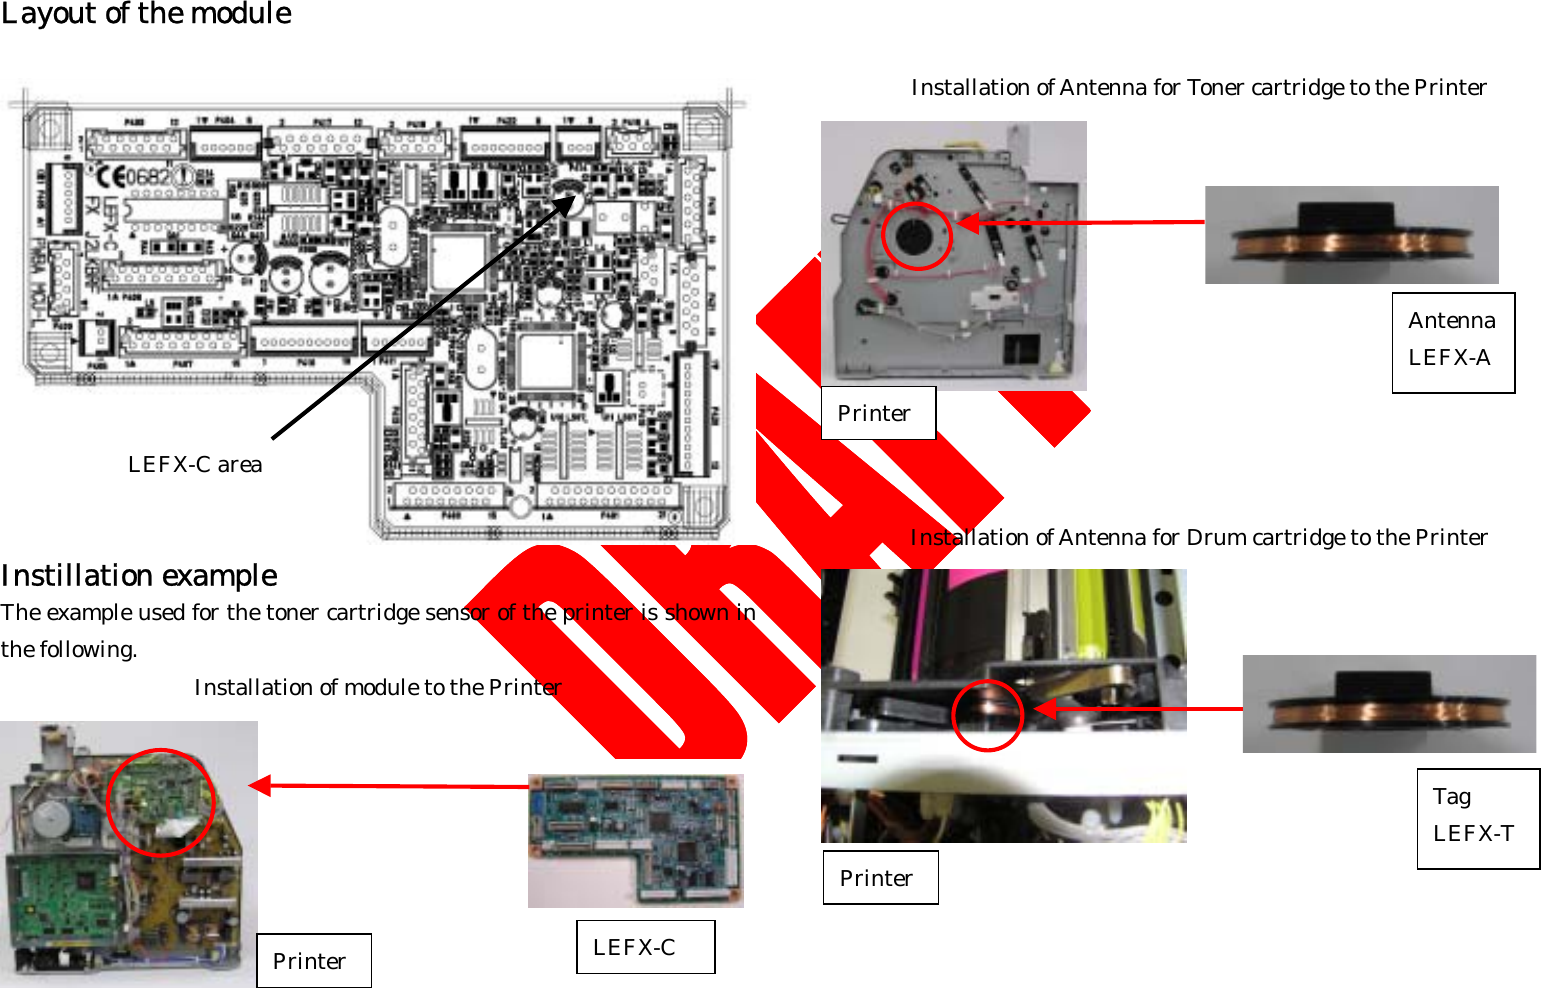    Layout of the module  Instillation example The example used for the toner cartridge sensor of the printer is shown in the following. Installation of module to the Printer    Installation of Antenna for Toner cartridge to the Printer  Antenna LEFX-A Printer     Installation of Antenna for Drum cartridge to the Printer     Printer  LEFX-C LEFX-C area Tag LEFX-T Printer 